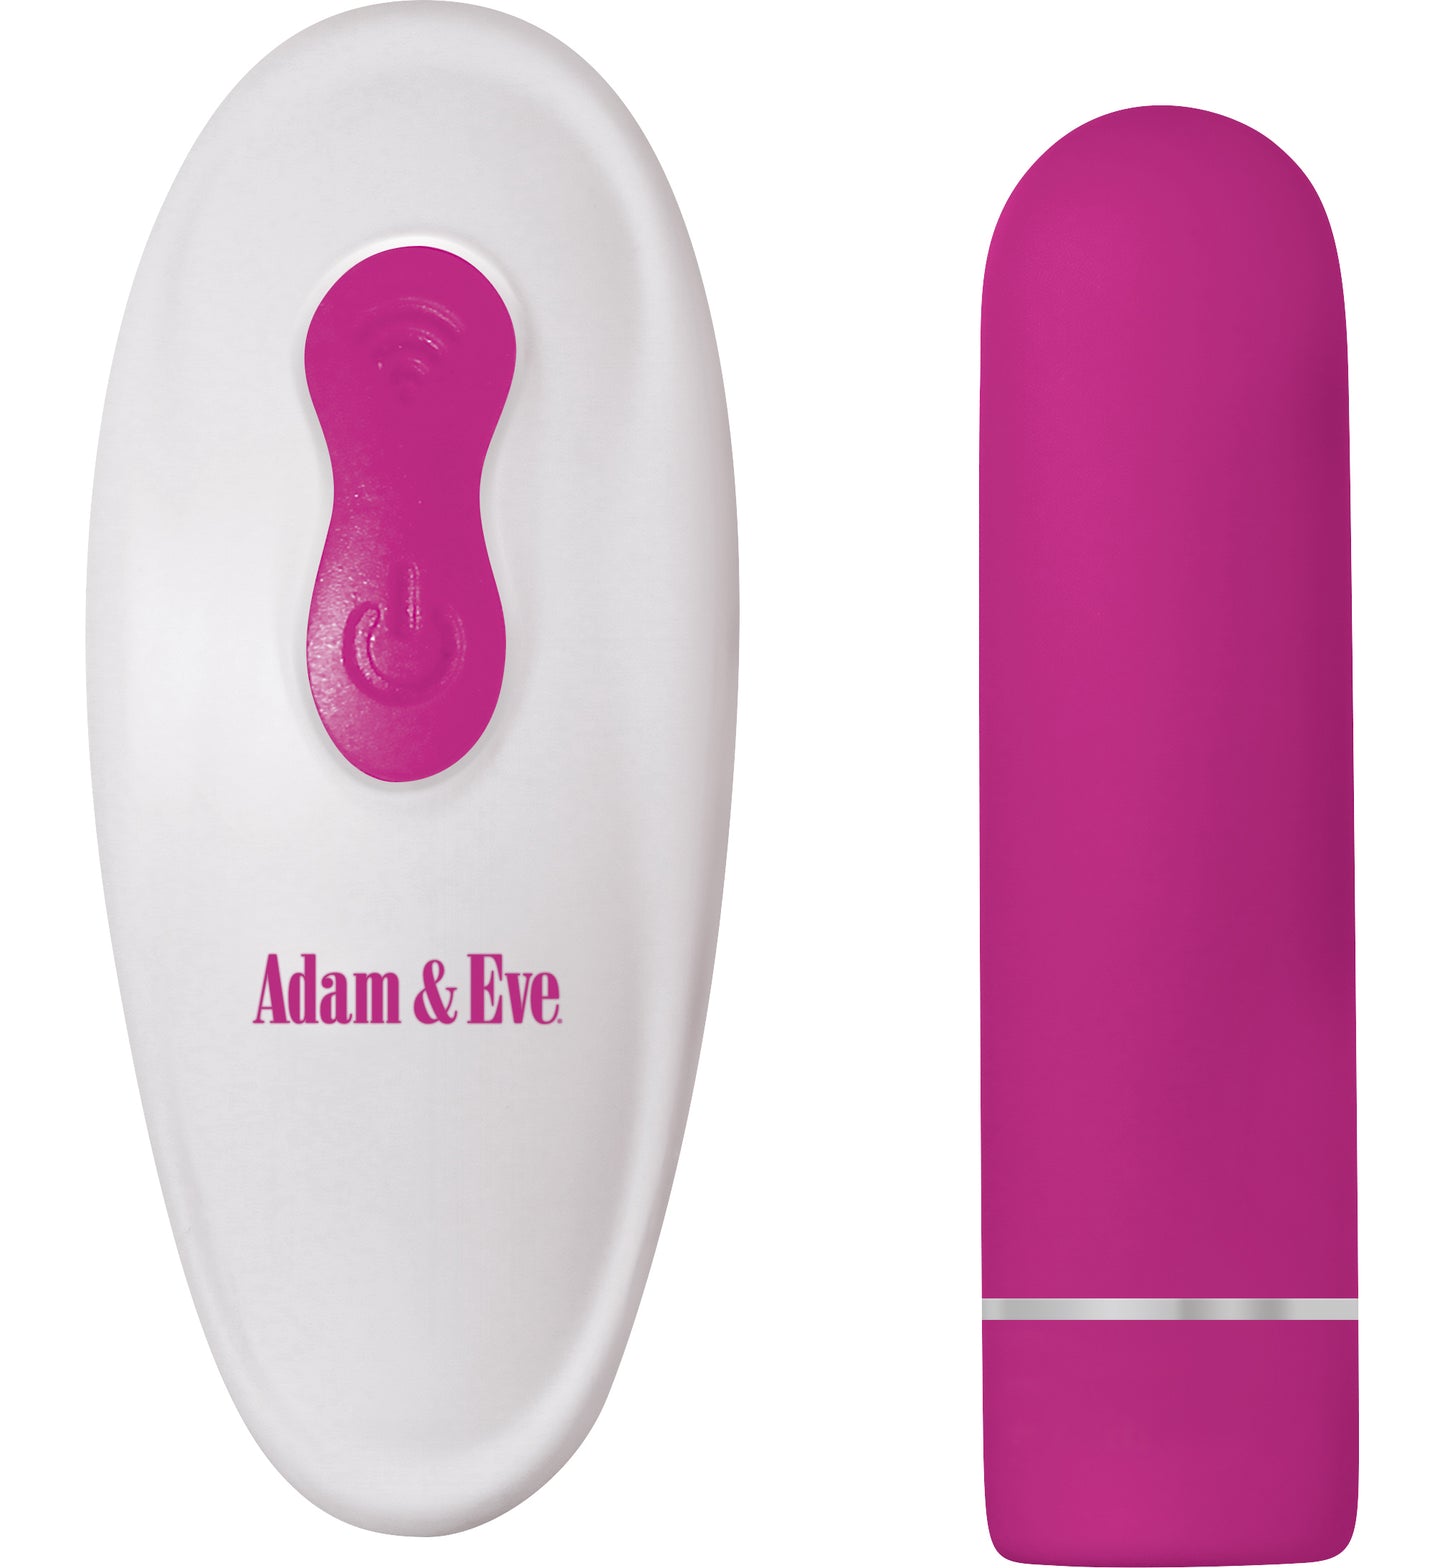 Eve's Rechargeable Remote Control Bullet AE-WF-4265-2